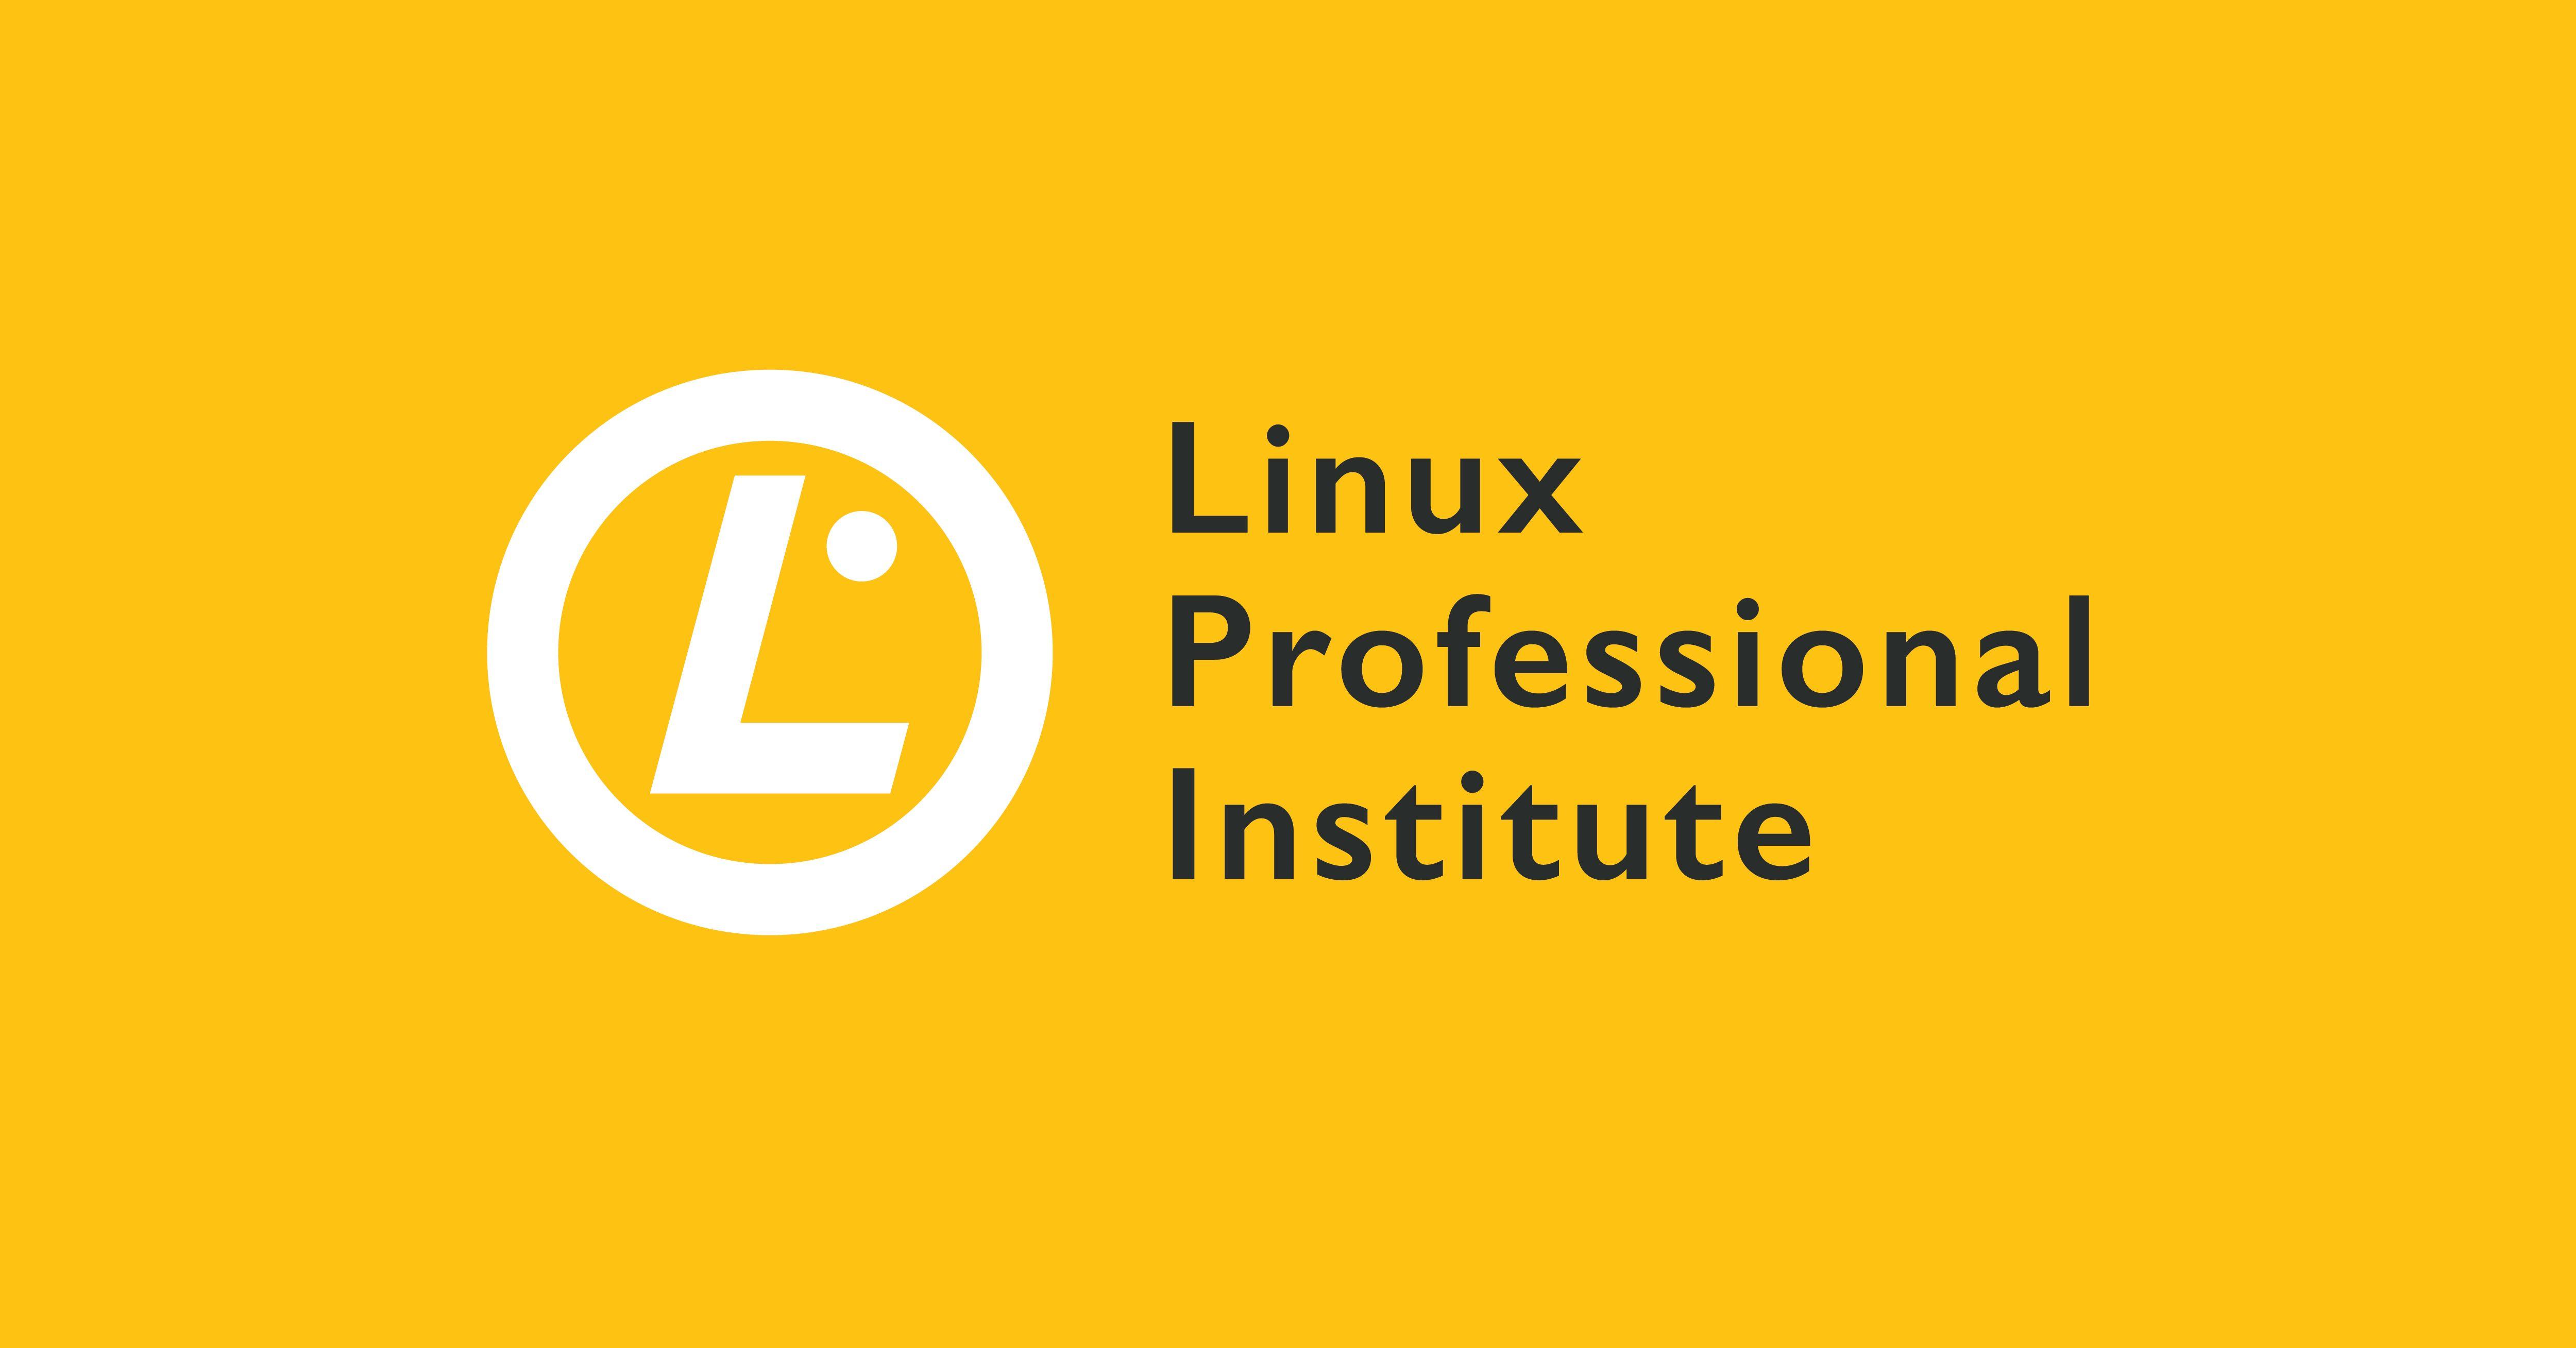 LPI Logo - Linux Professional Institute launches new website and brand identity ...